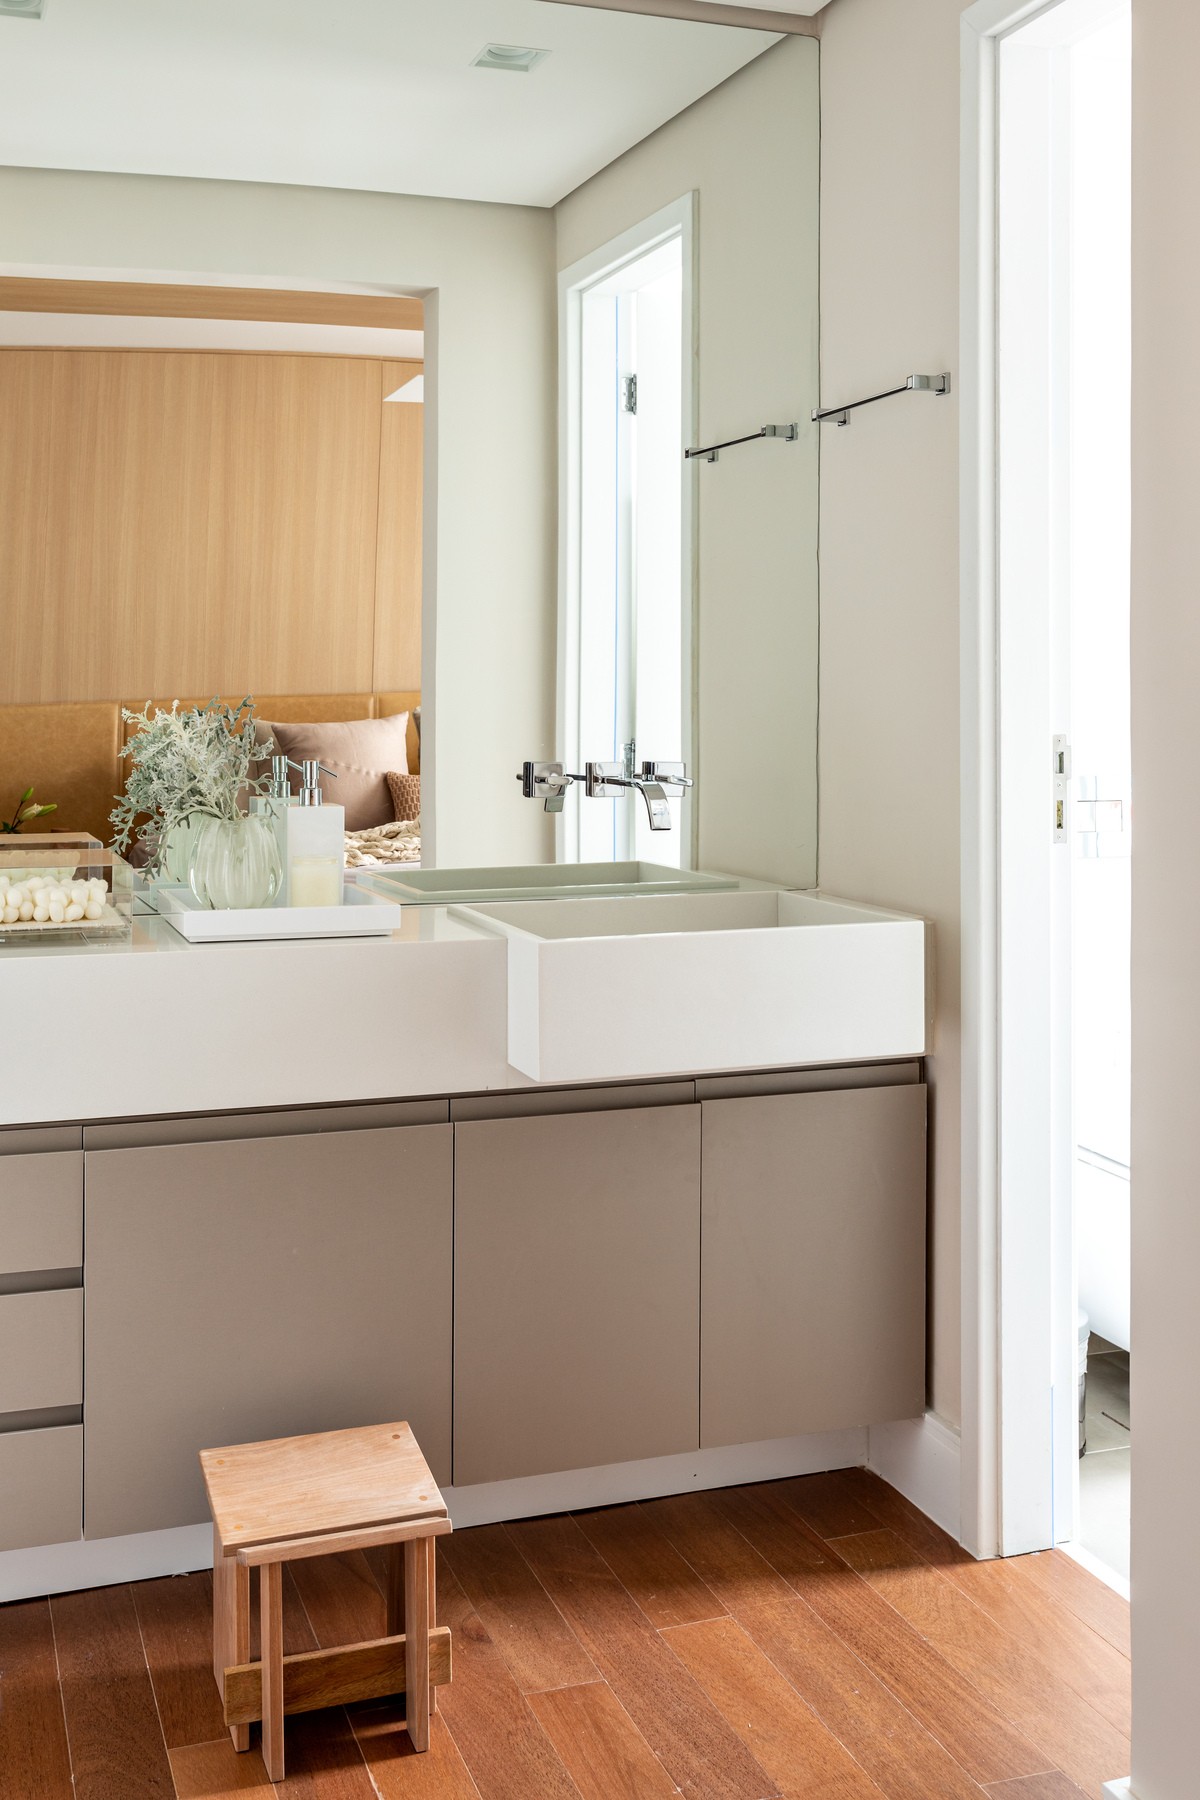 ROOM |  The sink is in the bedroom area to ensure more space in the environment (Photo: Fran Parente / Disclosure)